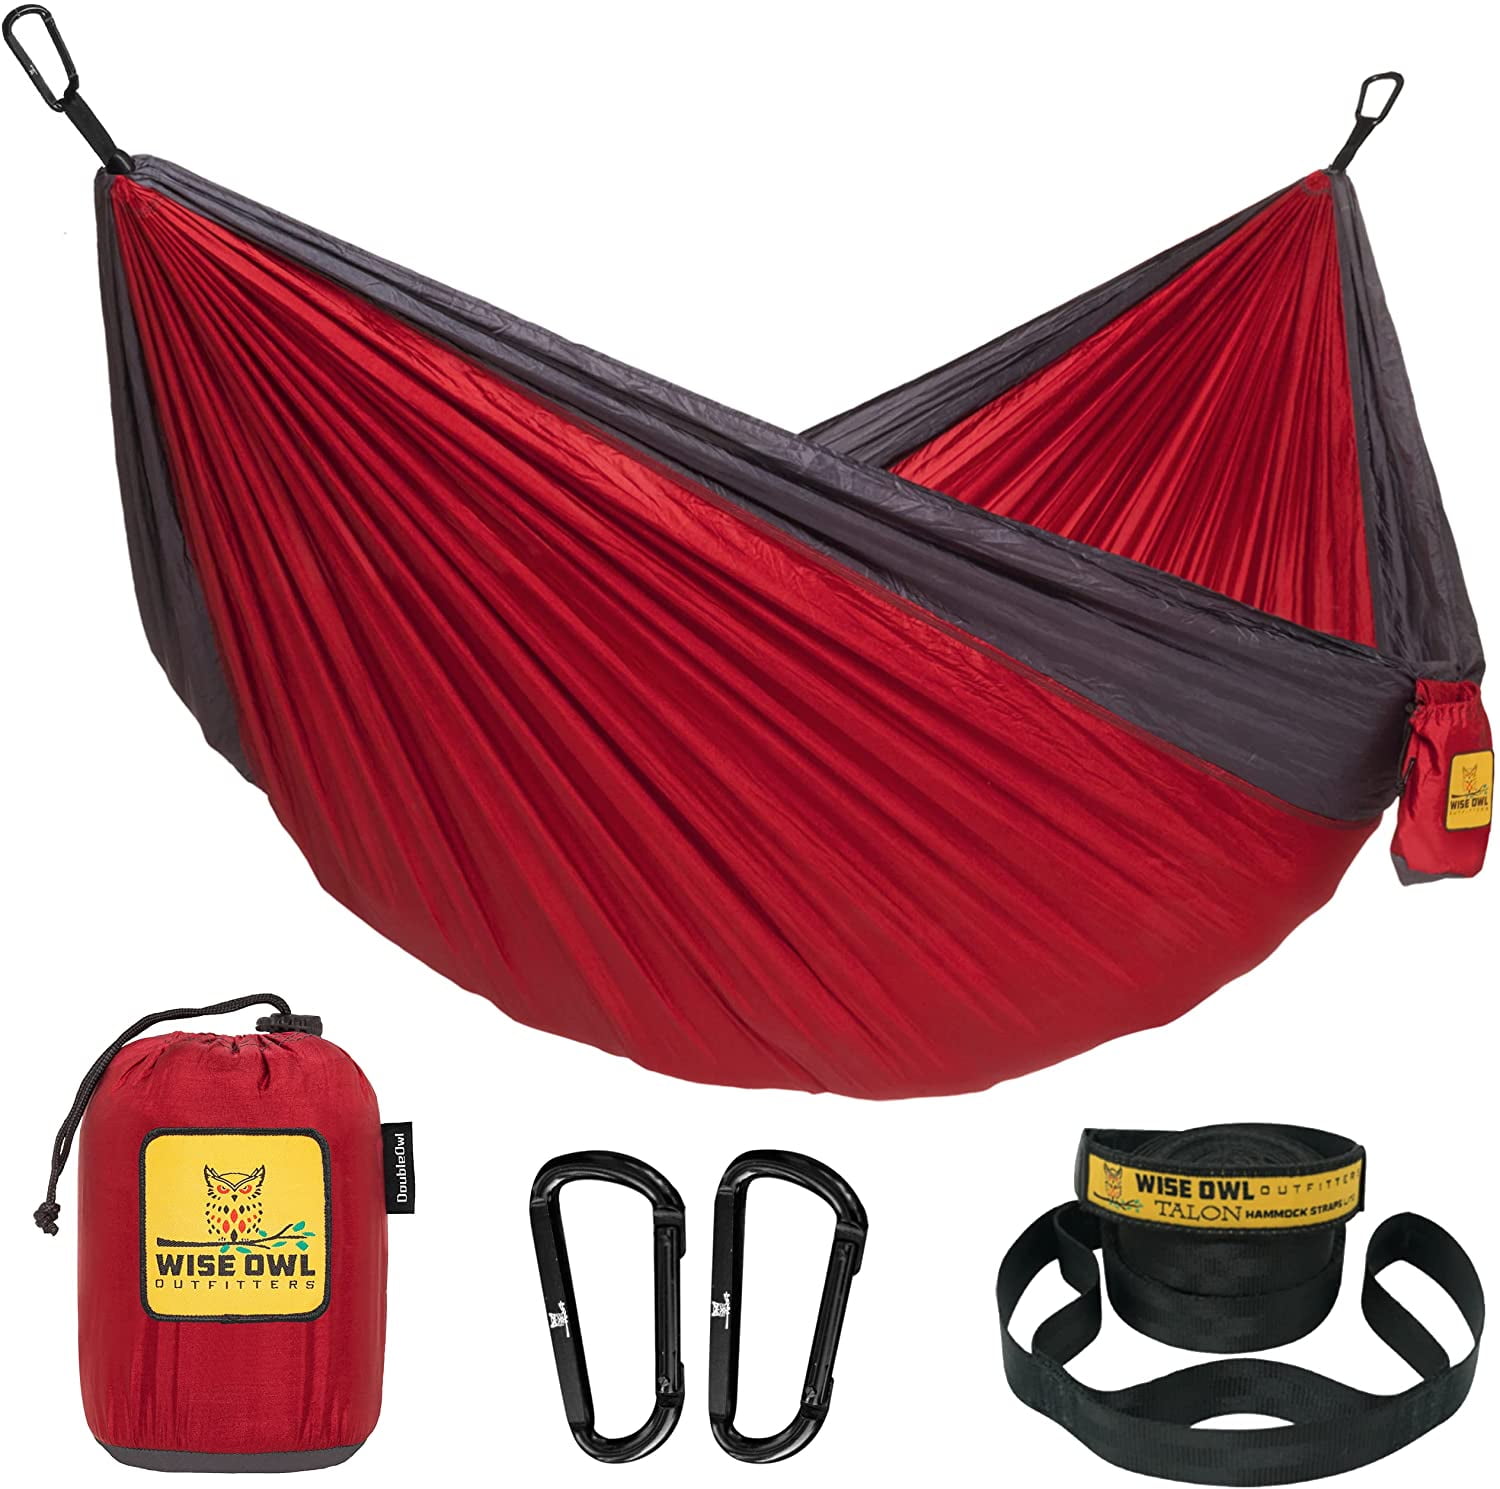 Outdoor Camping Double Hammock Portable Hammock with 2 Straps Red Blue Striped 